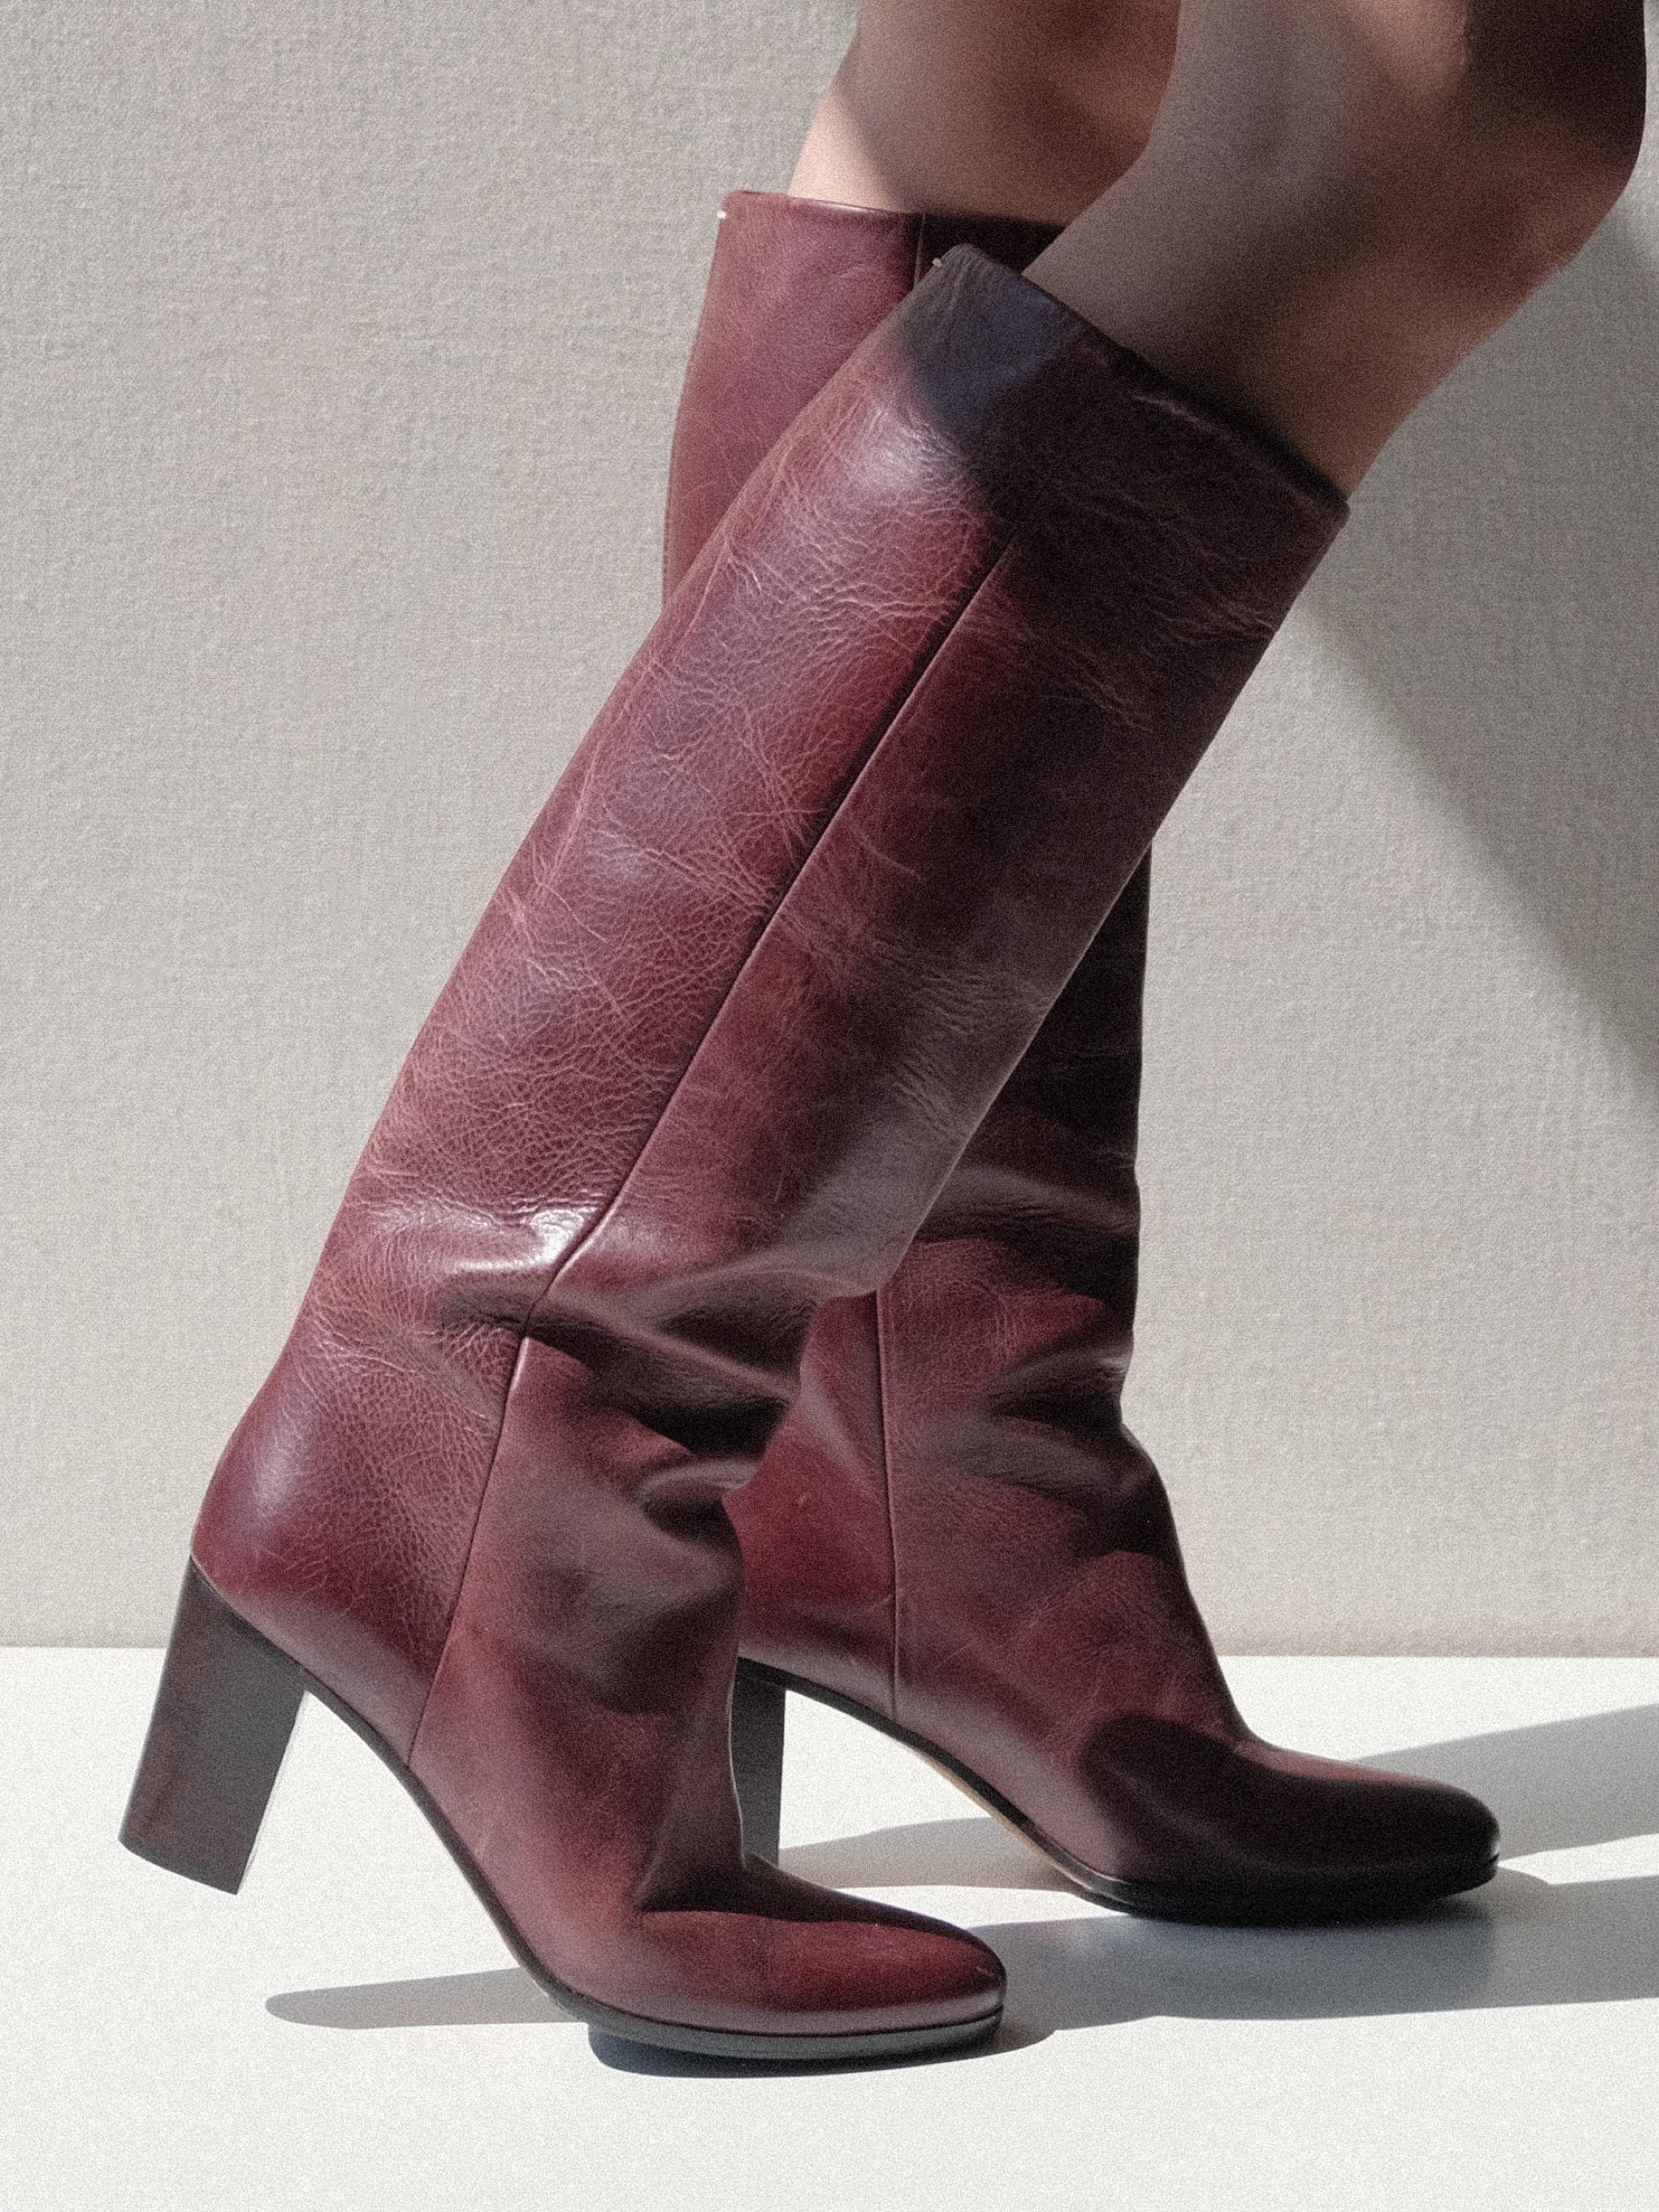 Martin Margiela Riding Boots Deep Red Size 37 Replica Line 22 For Sale 3